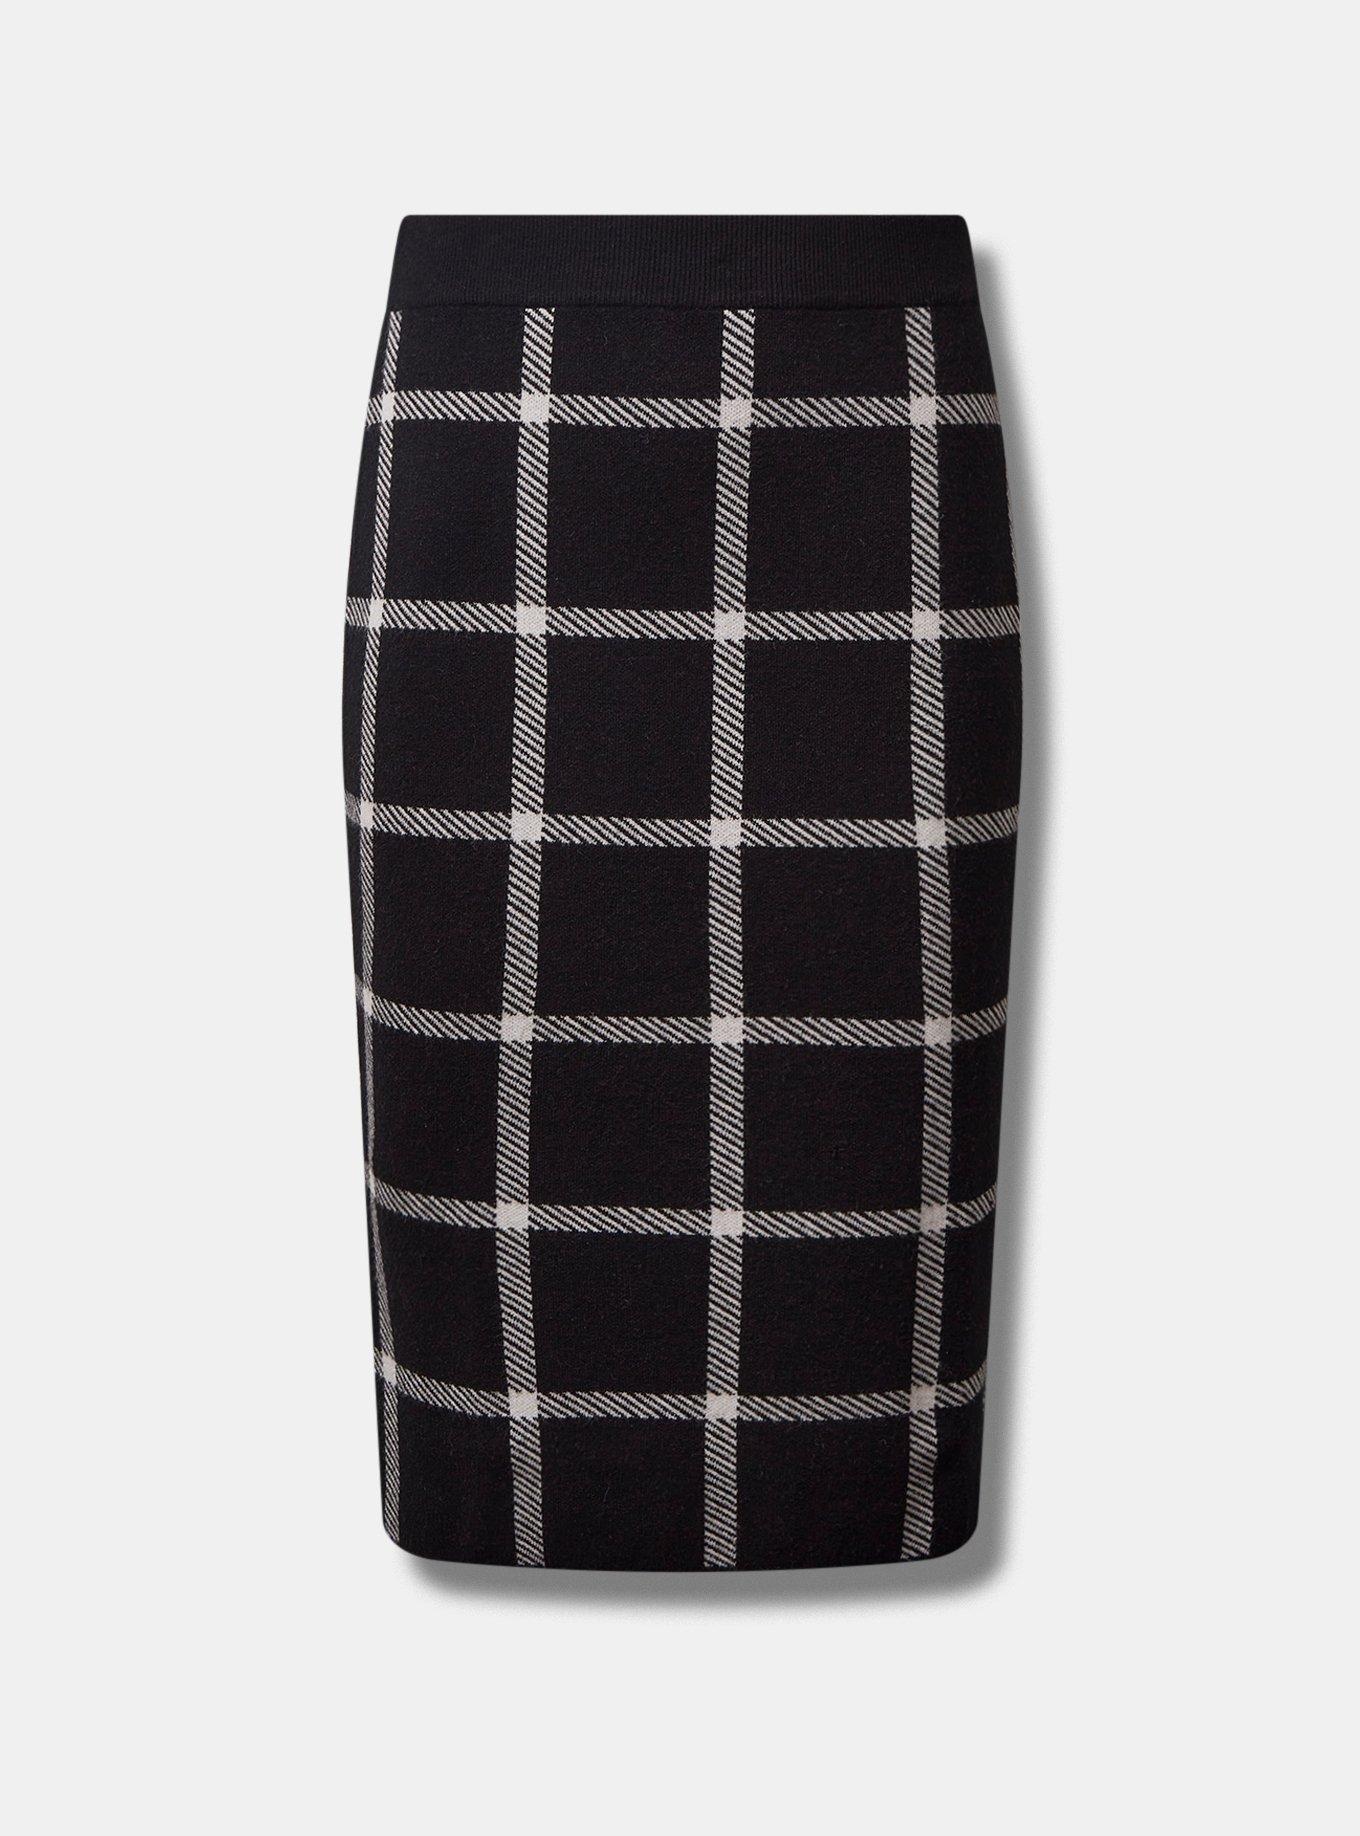 Buy Black Shapewear Pencil Skirt from the Next UK online shop